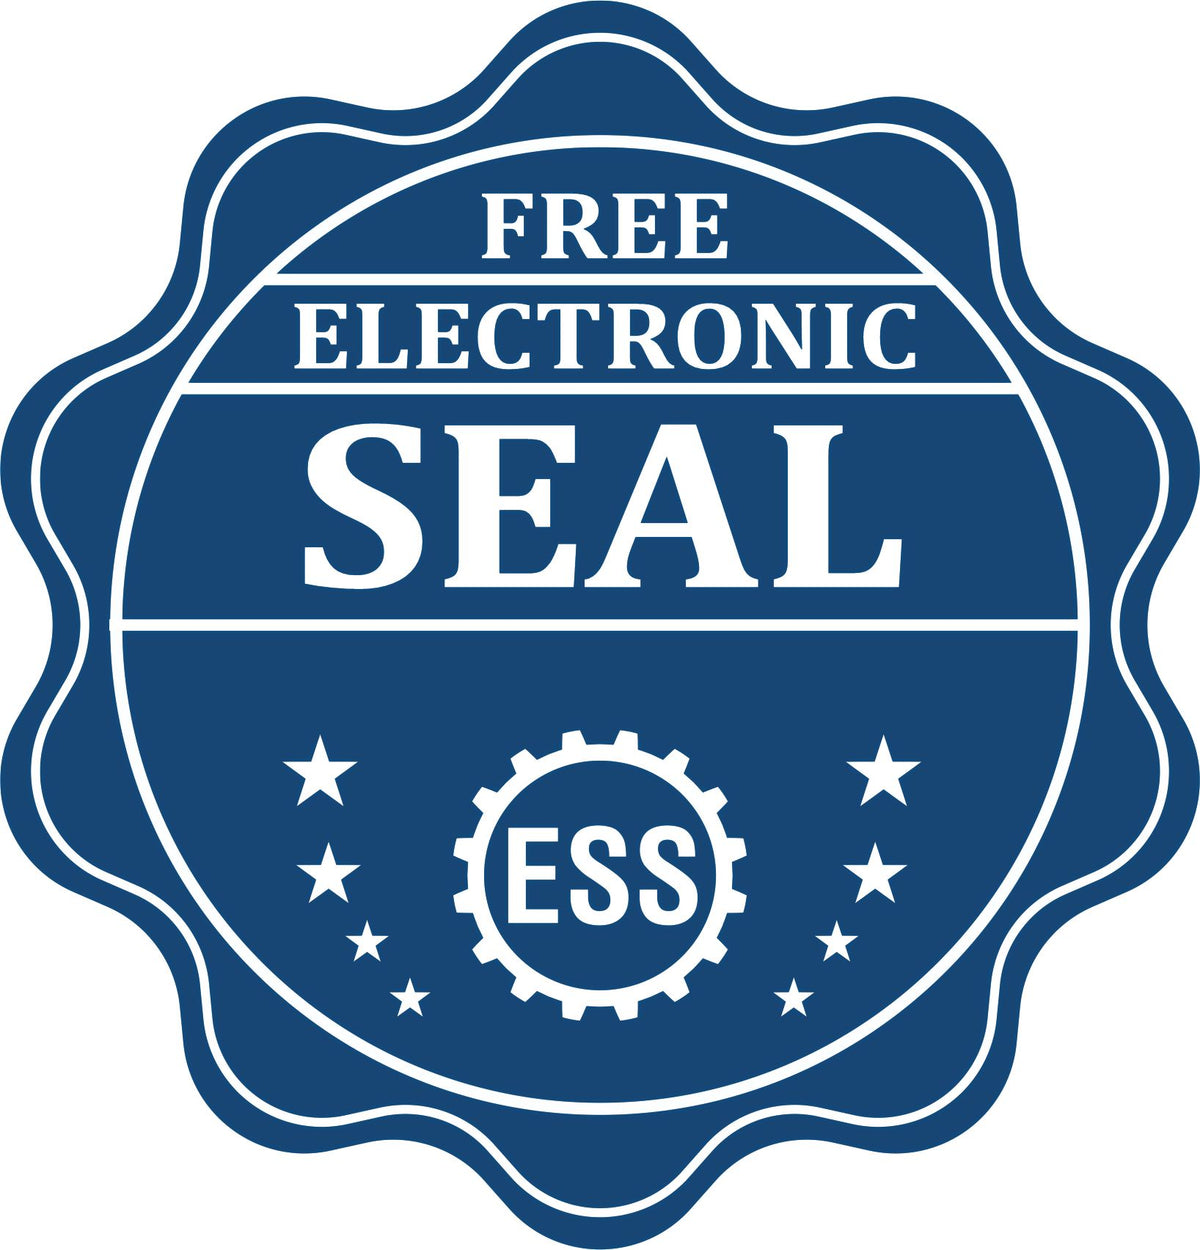 A badge showing a free electronic seal for the State of Nevada Extended Long Reach Geologist Seal with stars and the ESS gear on the emblem.